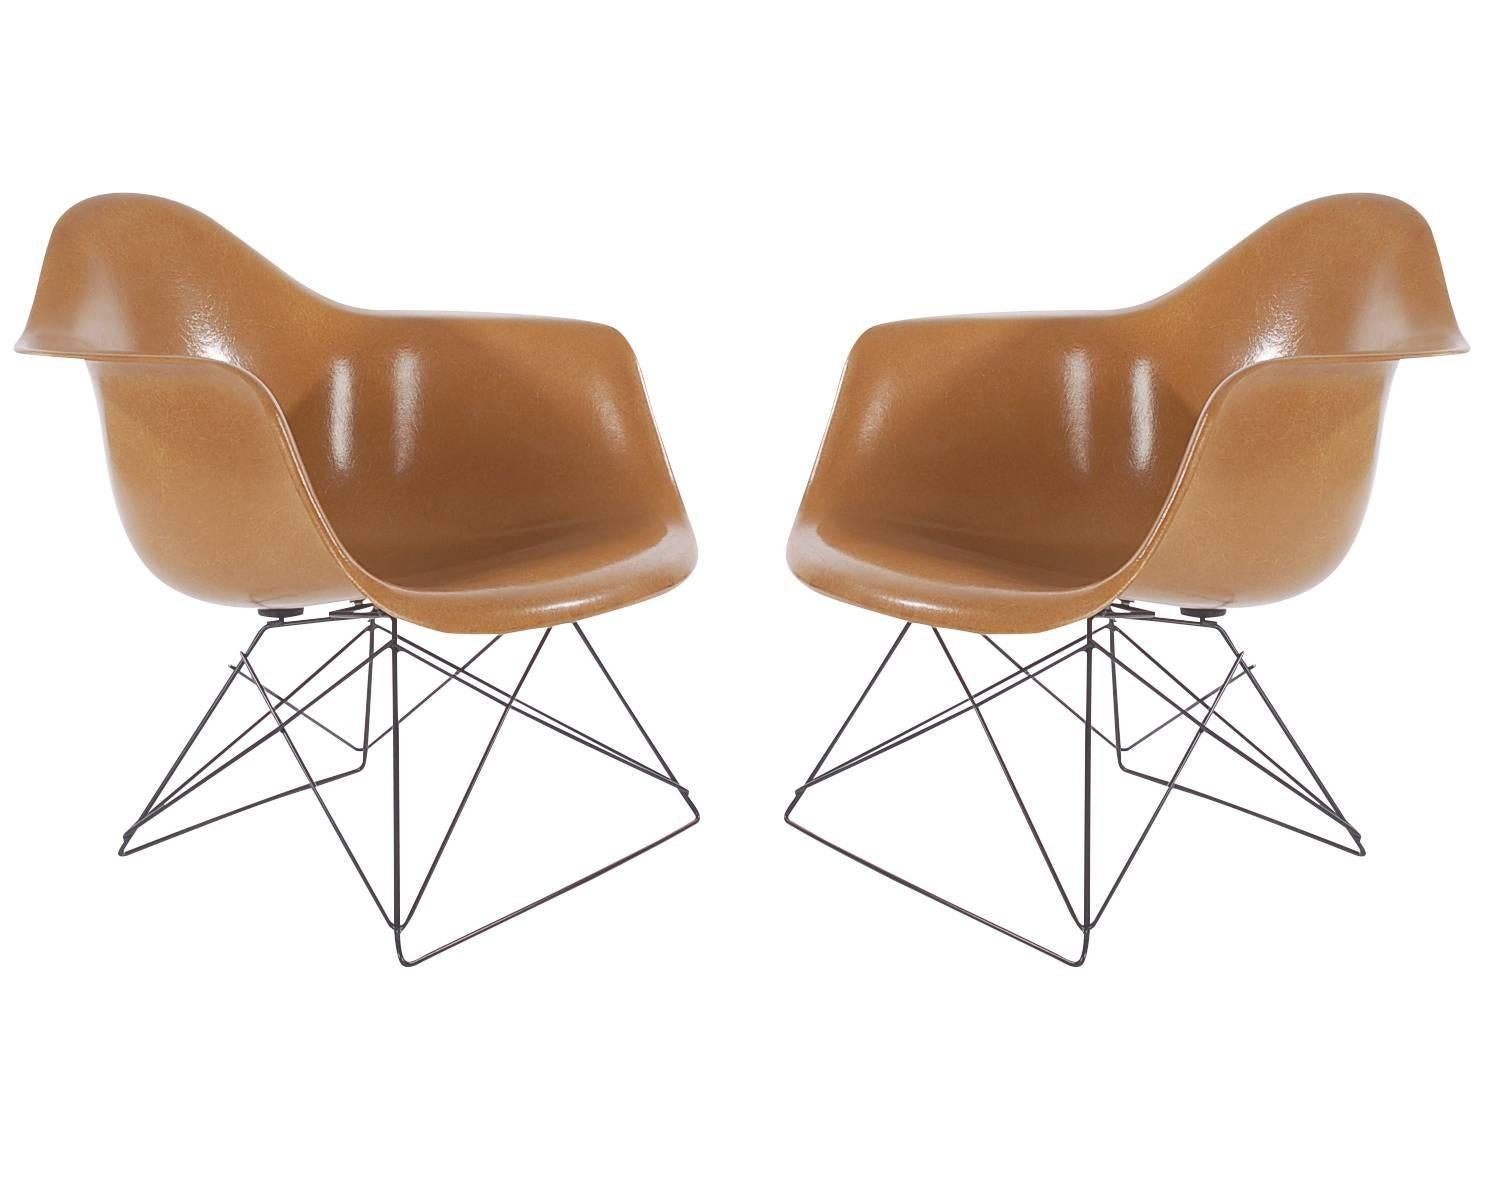 A matching pair of low sitting lounge chair shell chairs designed by Charles Eames for Herman Miller. Very uncommon 